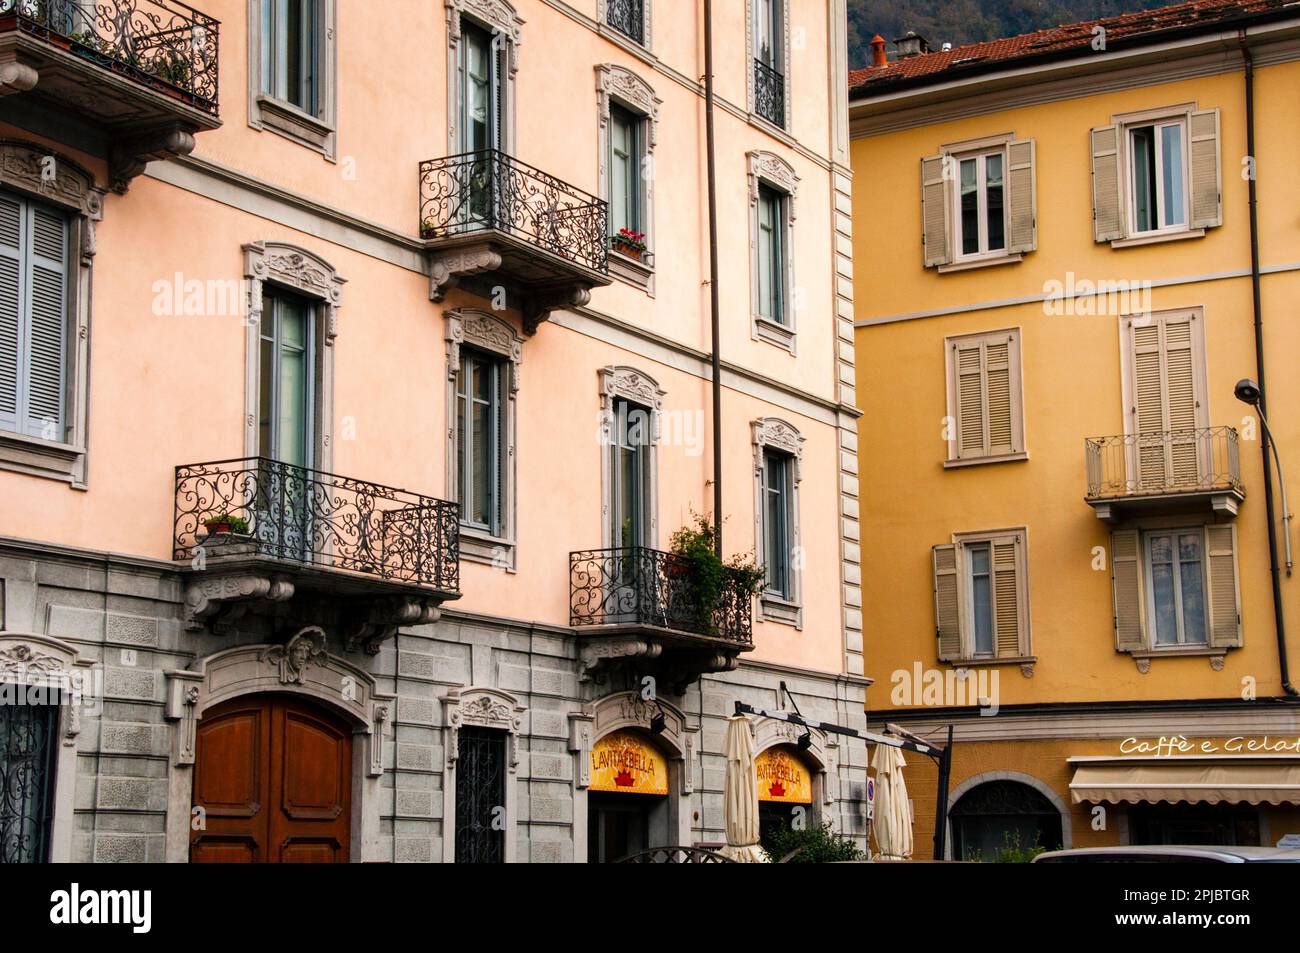 The Italian city of Como tucked between Lake Como, the third largest lake in Italy, and the Italian alps. Stock Photo